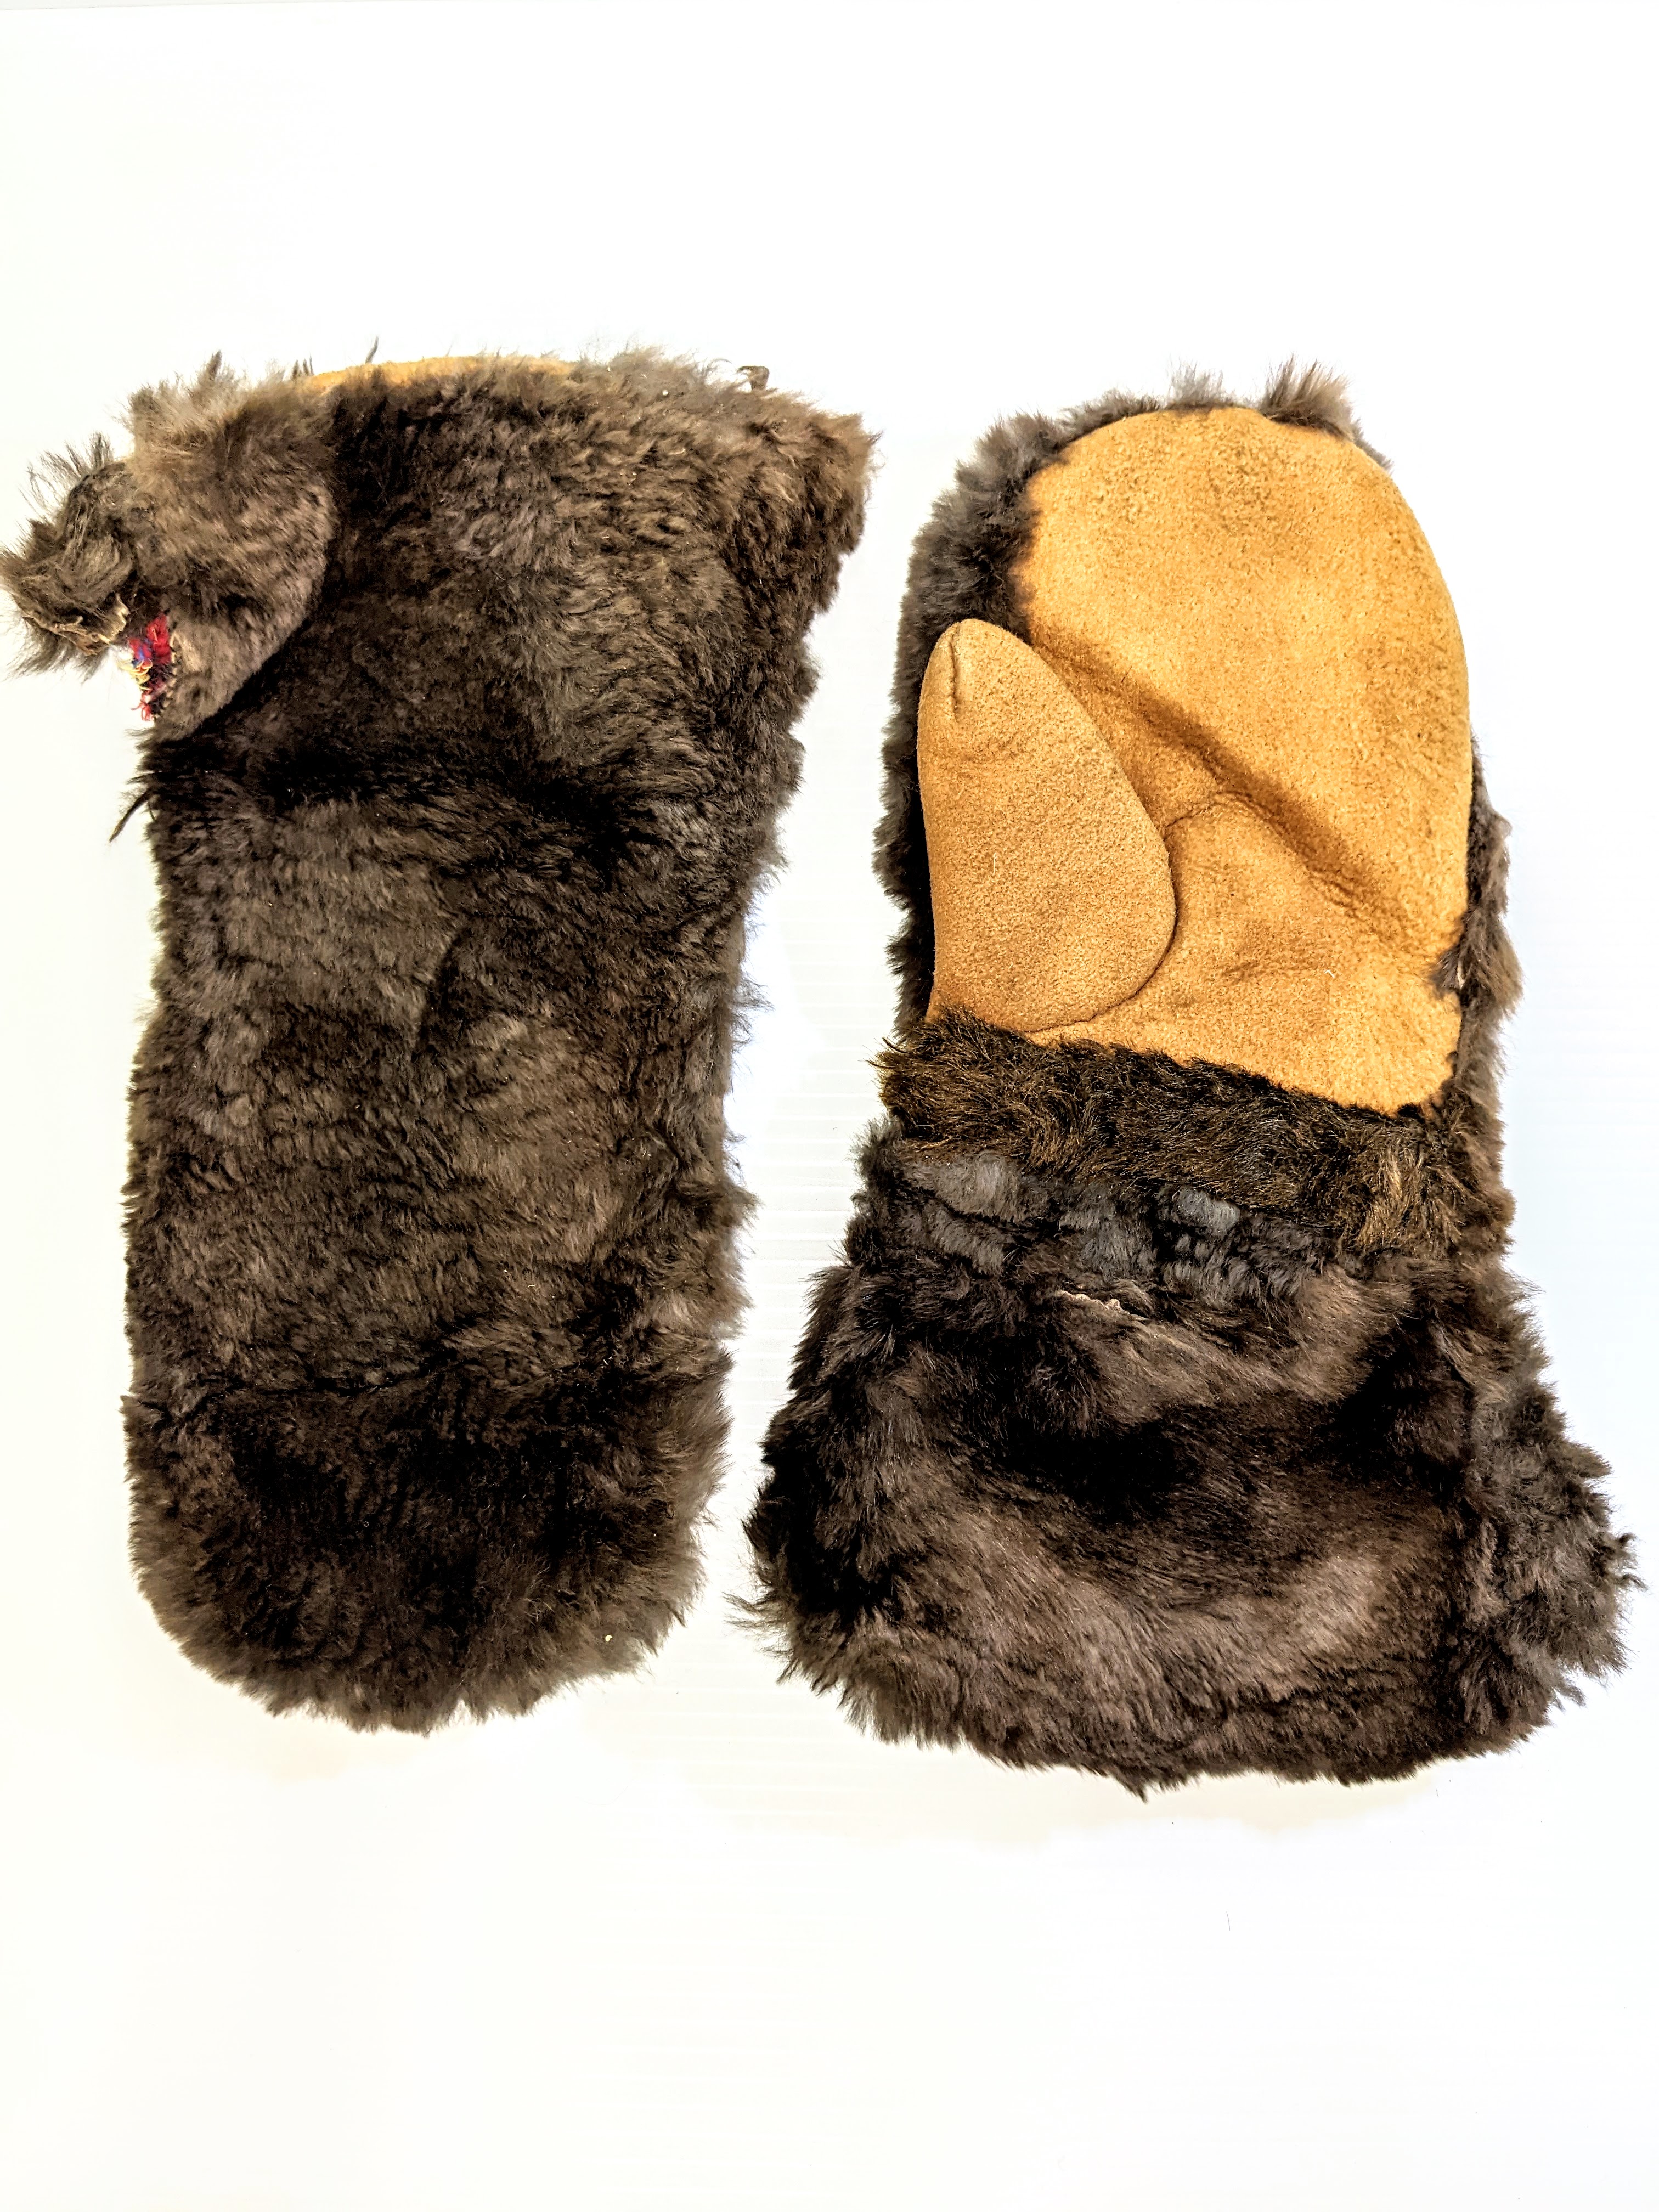 With the arrival of large fluffy snowflakes we thought these mittens were fitting for this week! They are handmade leather mitts with what we believe is beaver fur on the exterior. They were worn by Jessie Slade McGrew who came from England to Fort Vermilion as a teacher in 1909 to teach at the Stoney Point school. She held the position for 15 years. Jessie was active in the Anglican Church and helped develop the first library collection in Fort Vermilion!
998.1.202 / Newman Jack + Pearl
24/10/2022